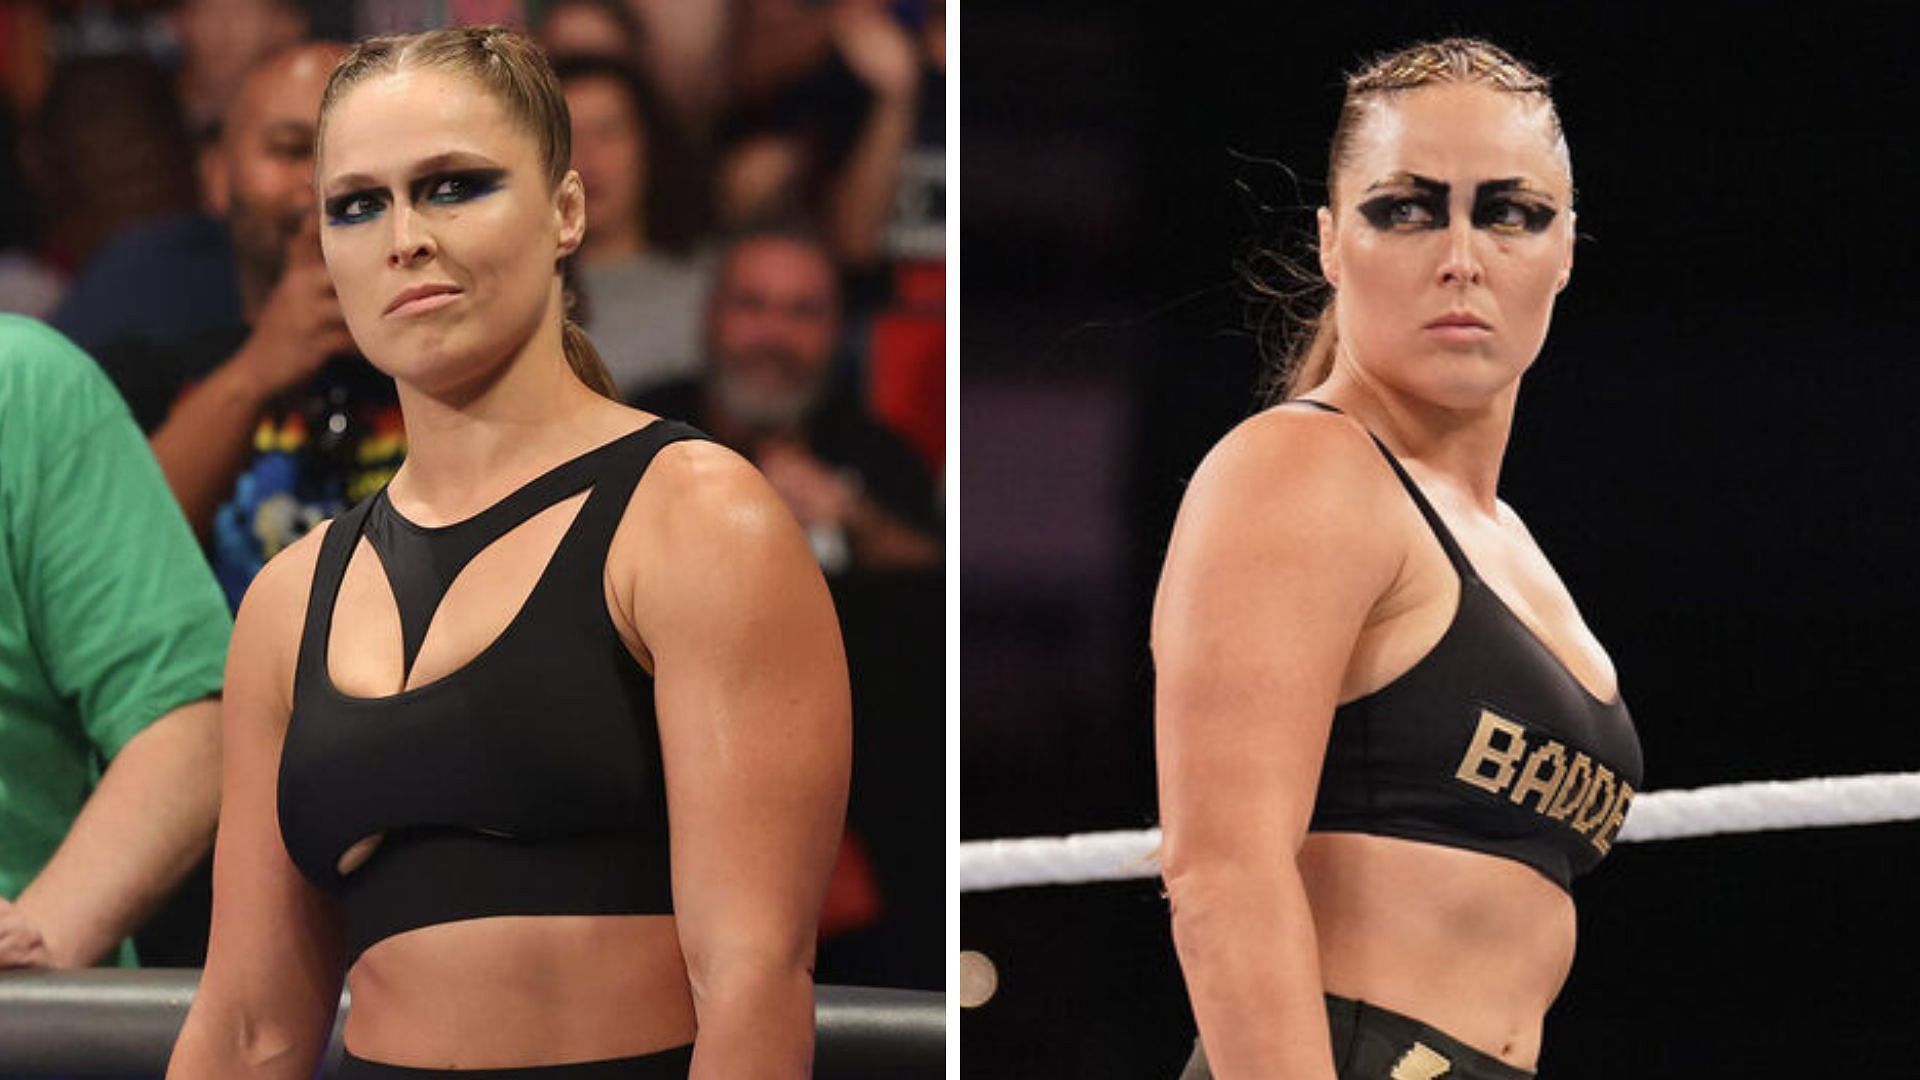 Rousey is no longer with the promotion.